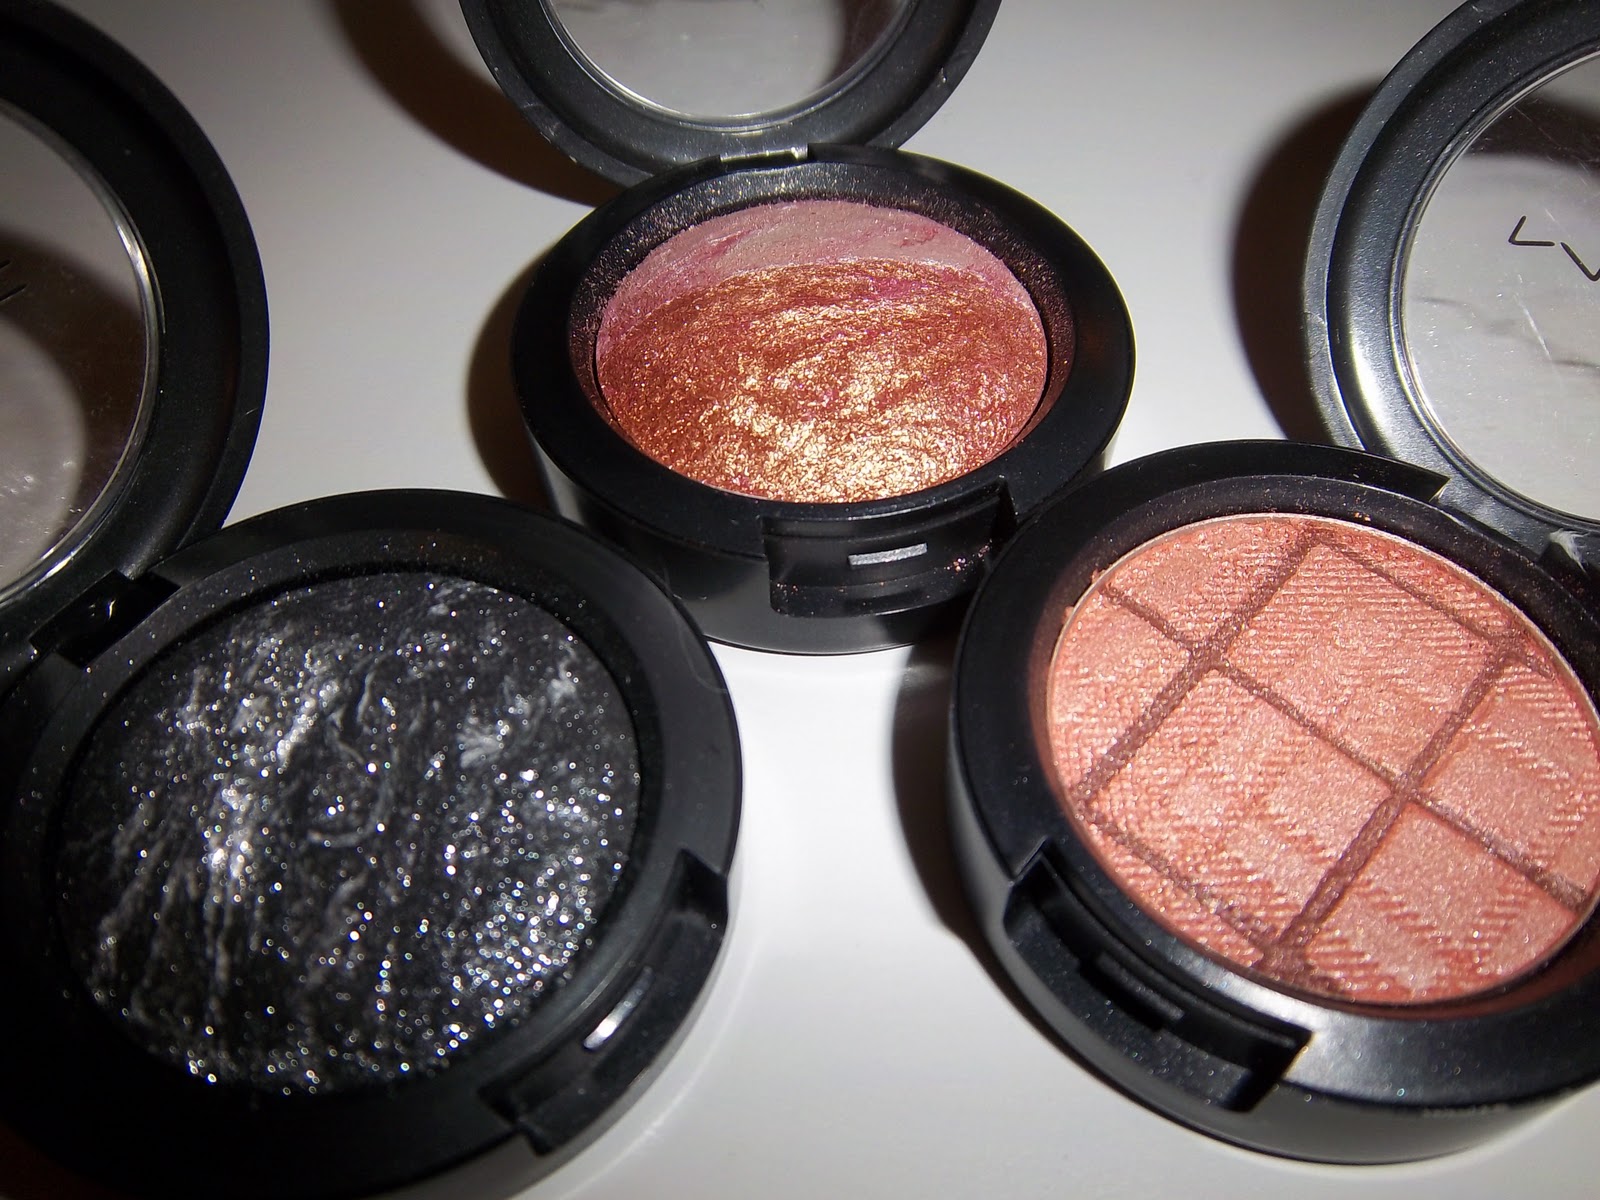 Get to know your make-up: MAC larger eyeshadows